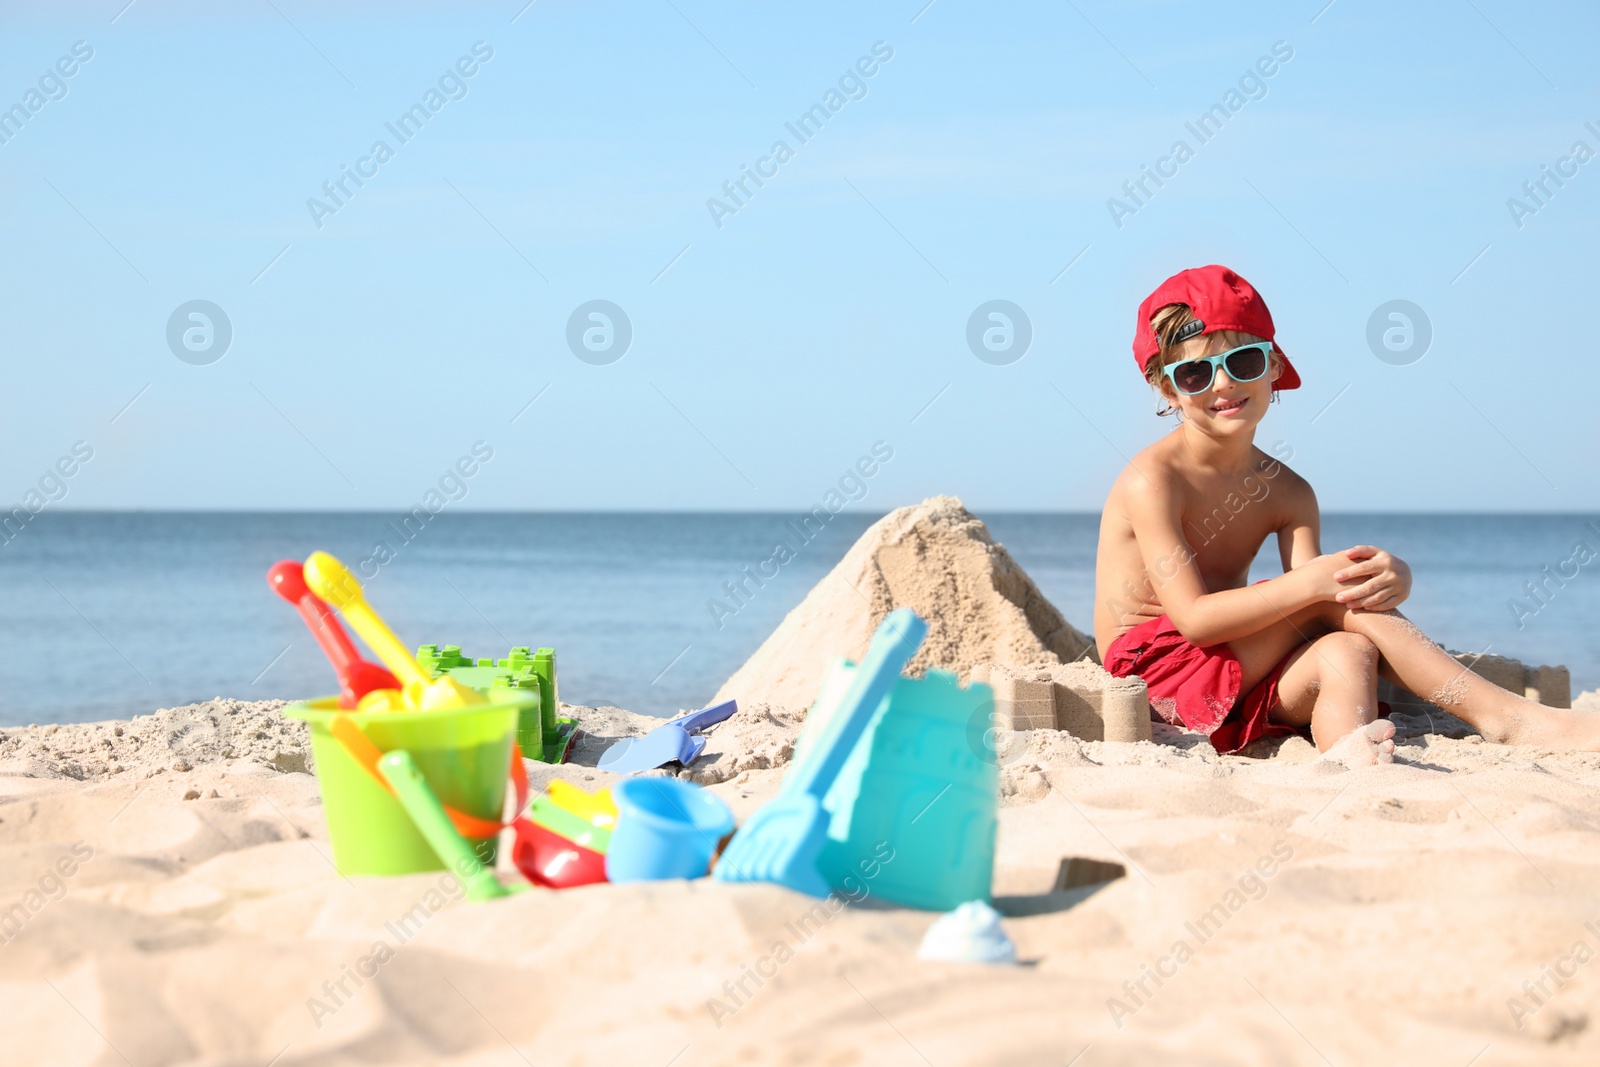 Photo of Cute little child and plastic toys at sandy beach on sunny day